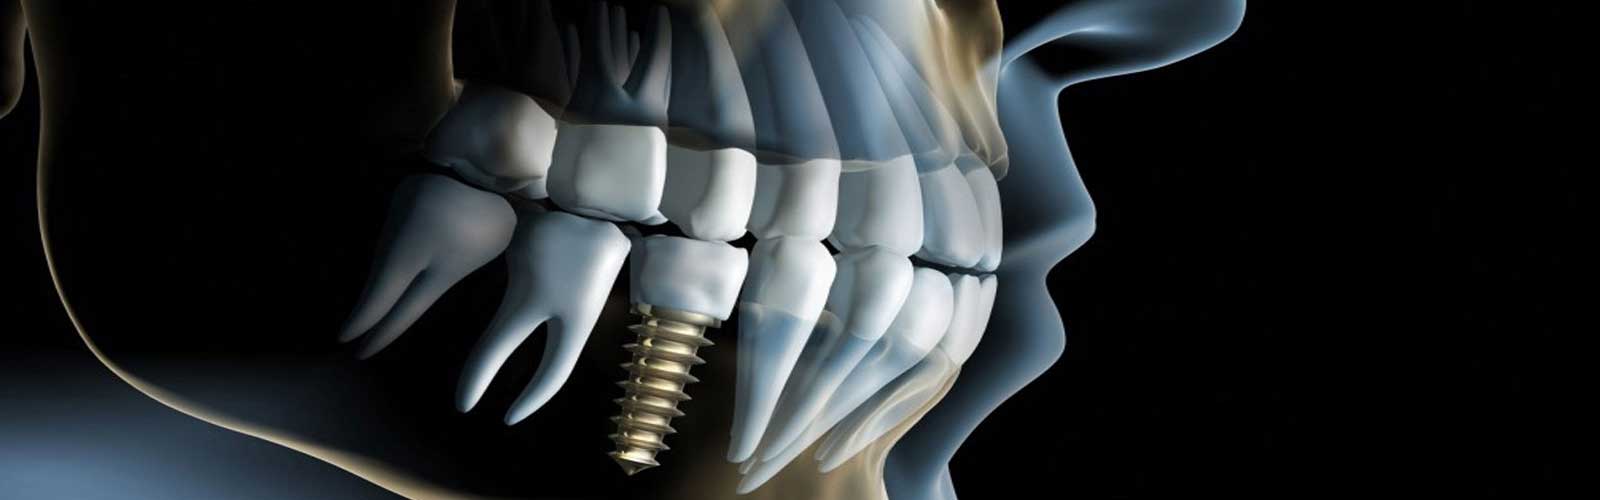 LATEST AND ADVANCED TREND OF DENTAL IMPLANTOLOGY